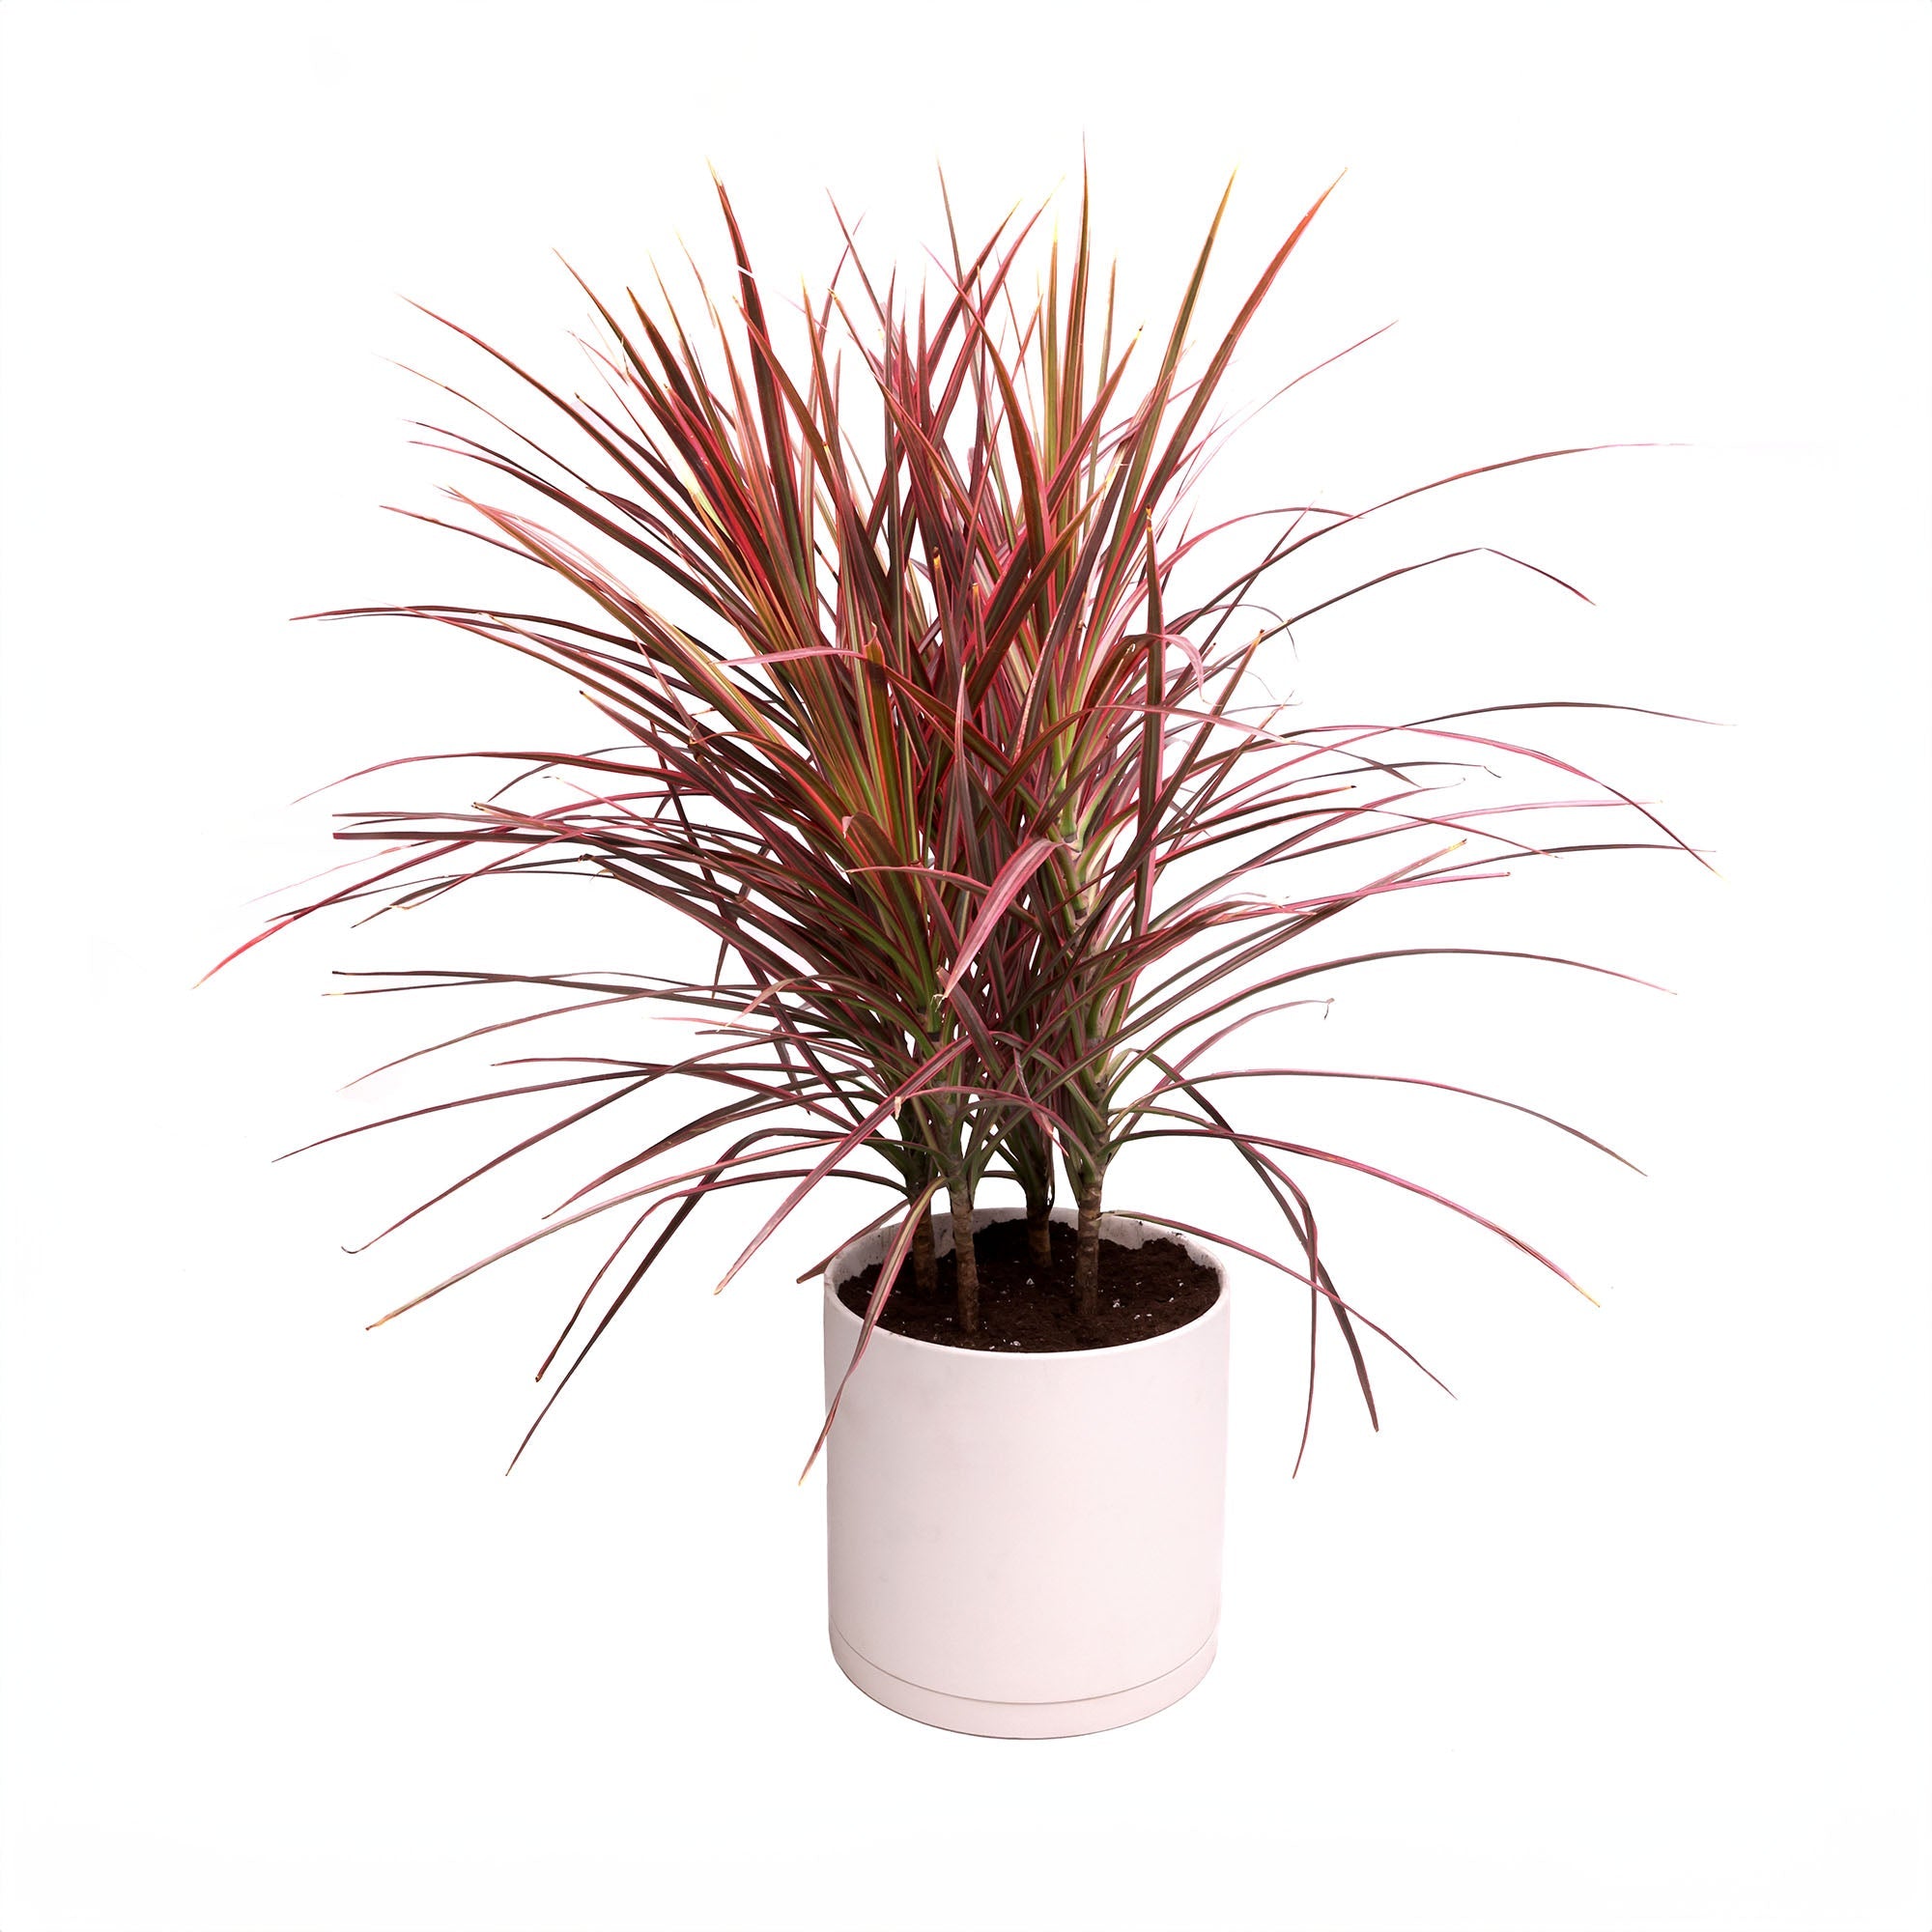 A 10-inch Dracaena Marginata Colorama plant with long, slender red-tipped leaves, potted in a pink blush dojo pot with detachable saucer against a white background